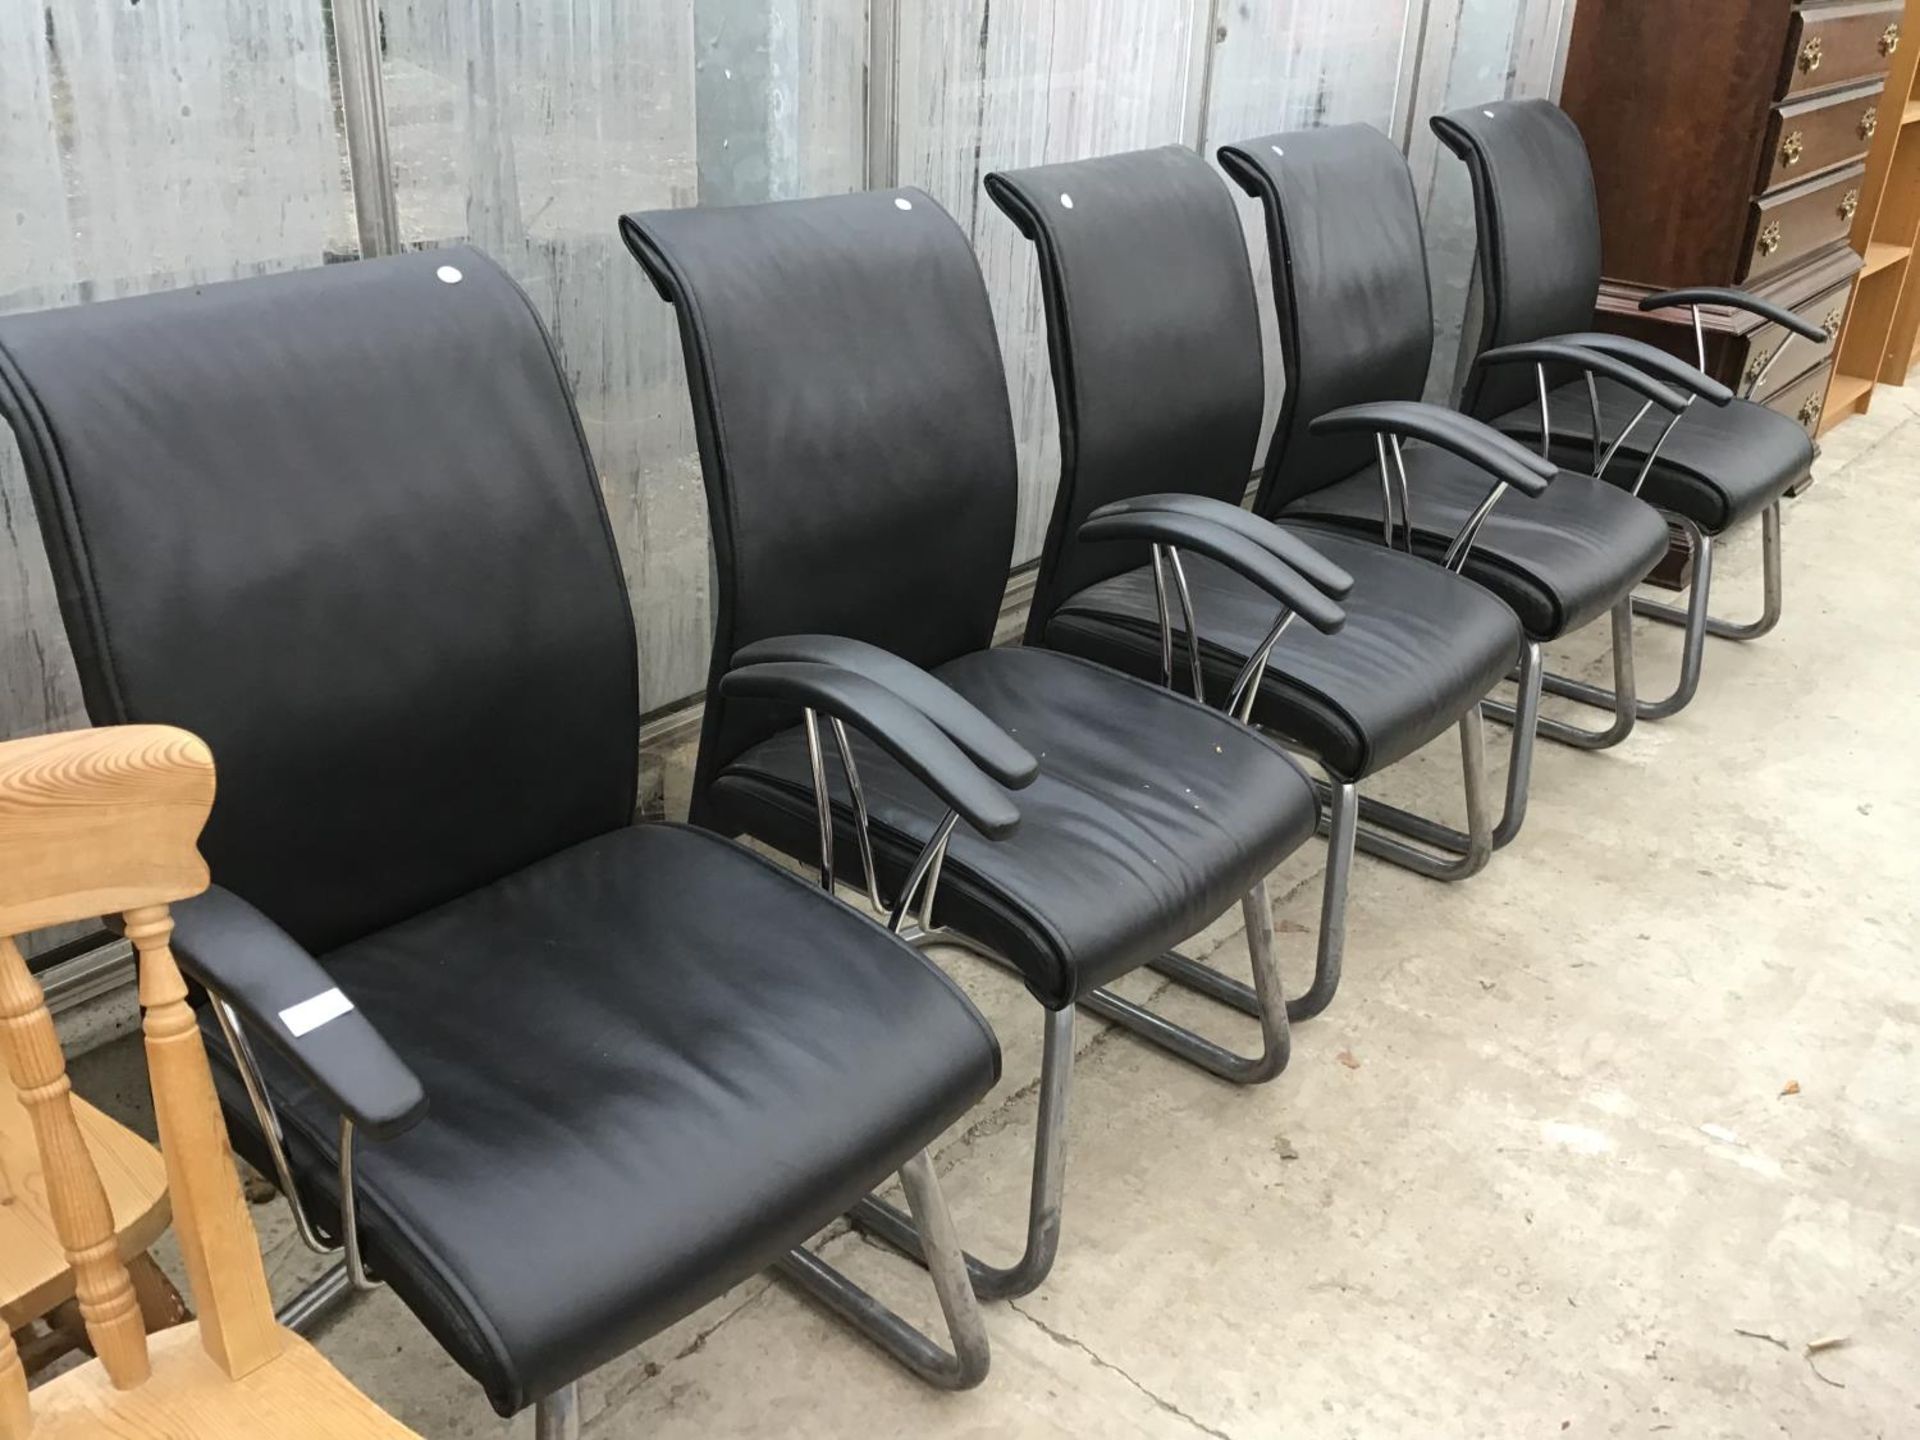 A SET OF FIVE BLACK LEATHERETTE WAITING ROOM ARMCHAIRS